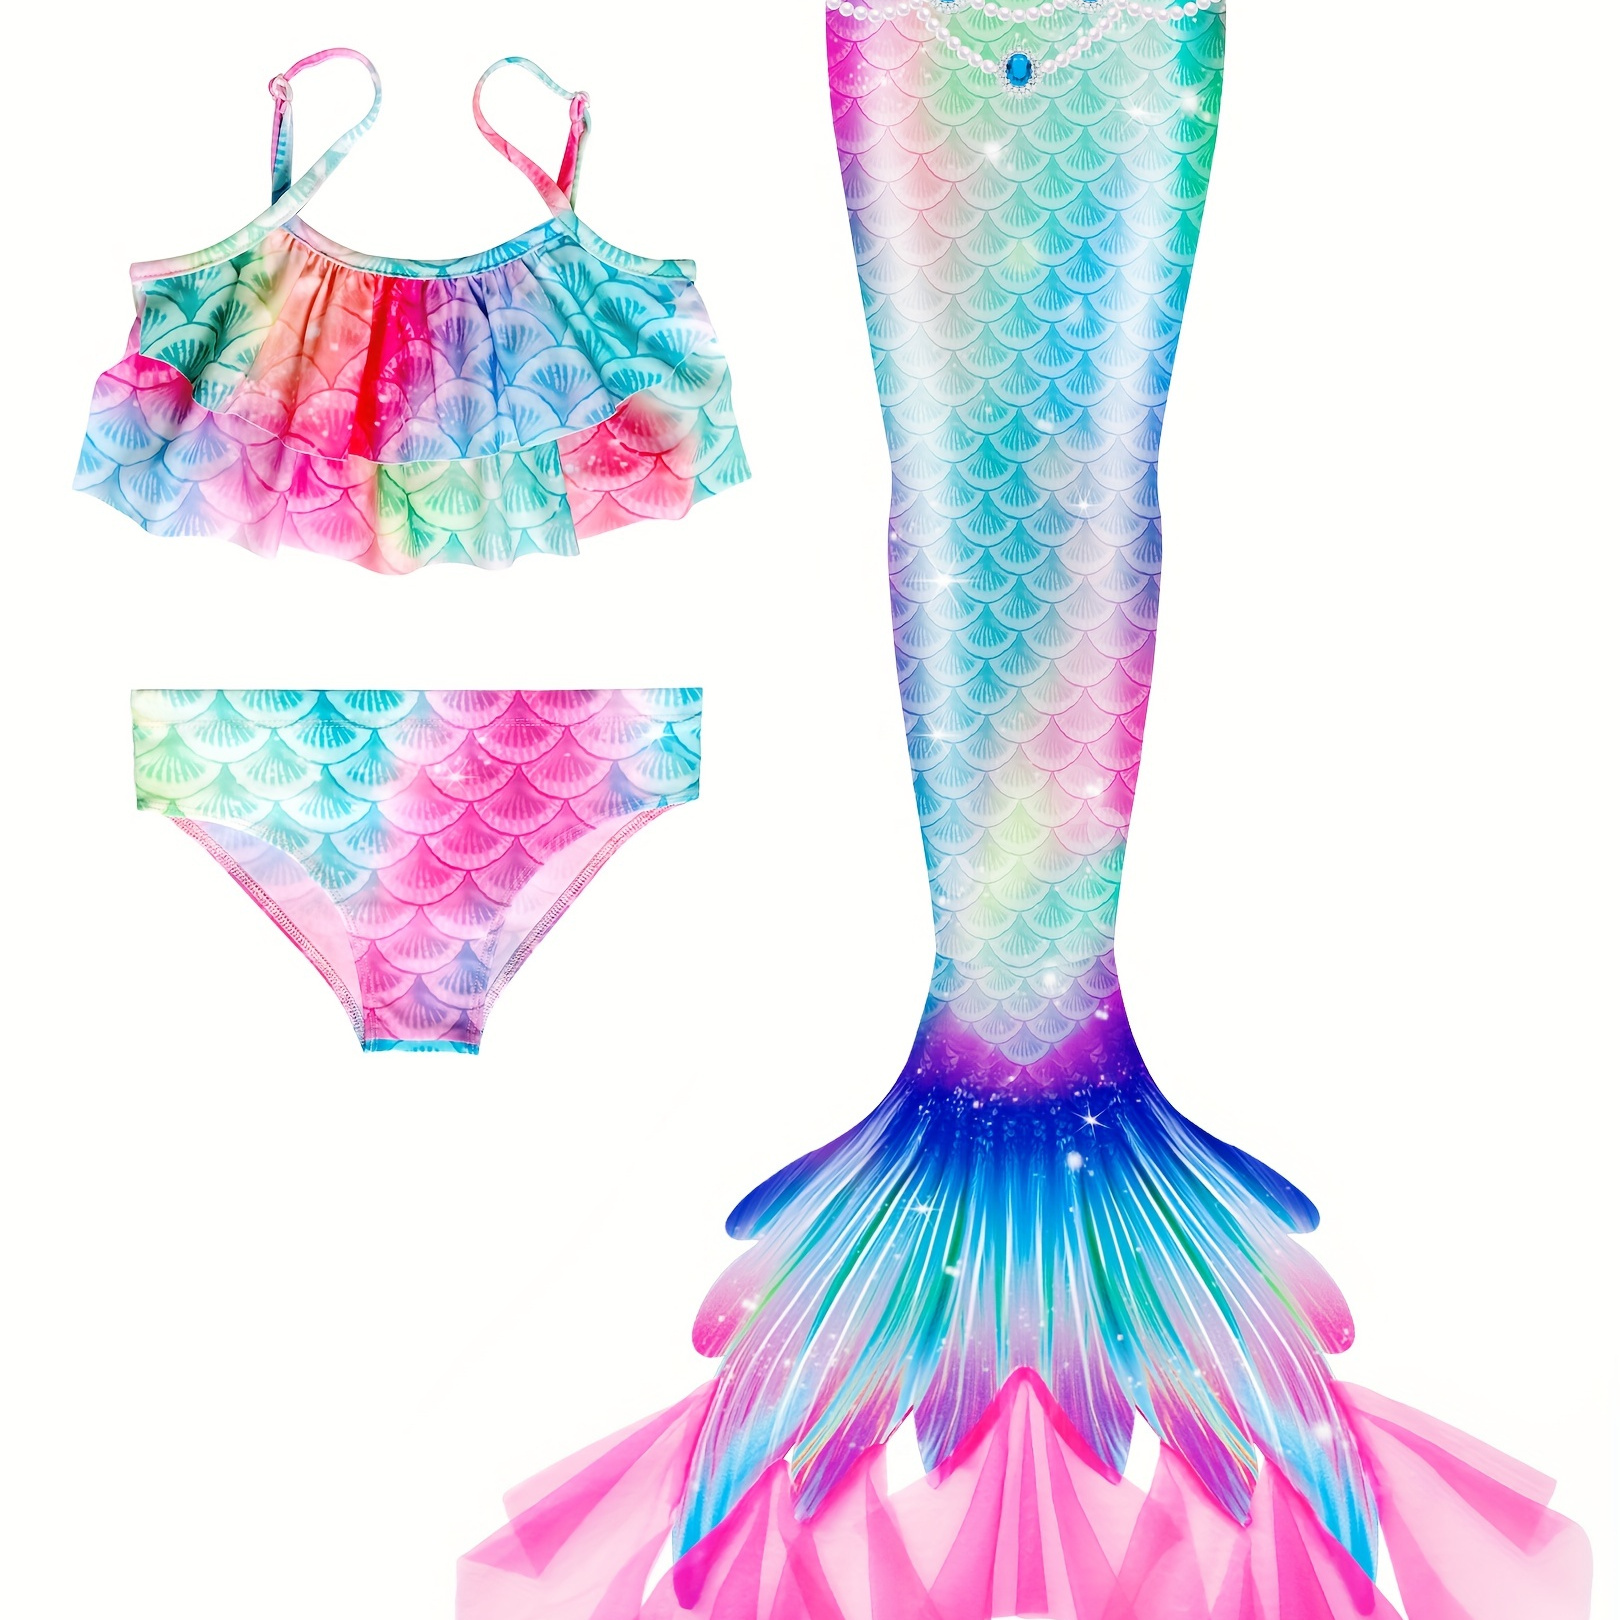 

Girls 3pcs/set Stylish Dress Up Outfit, Scales Pattern Ruffle Hem Cami Swim Top & Brief & Mermaid Tail Skirt For Mermaid Pool Party Clothing